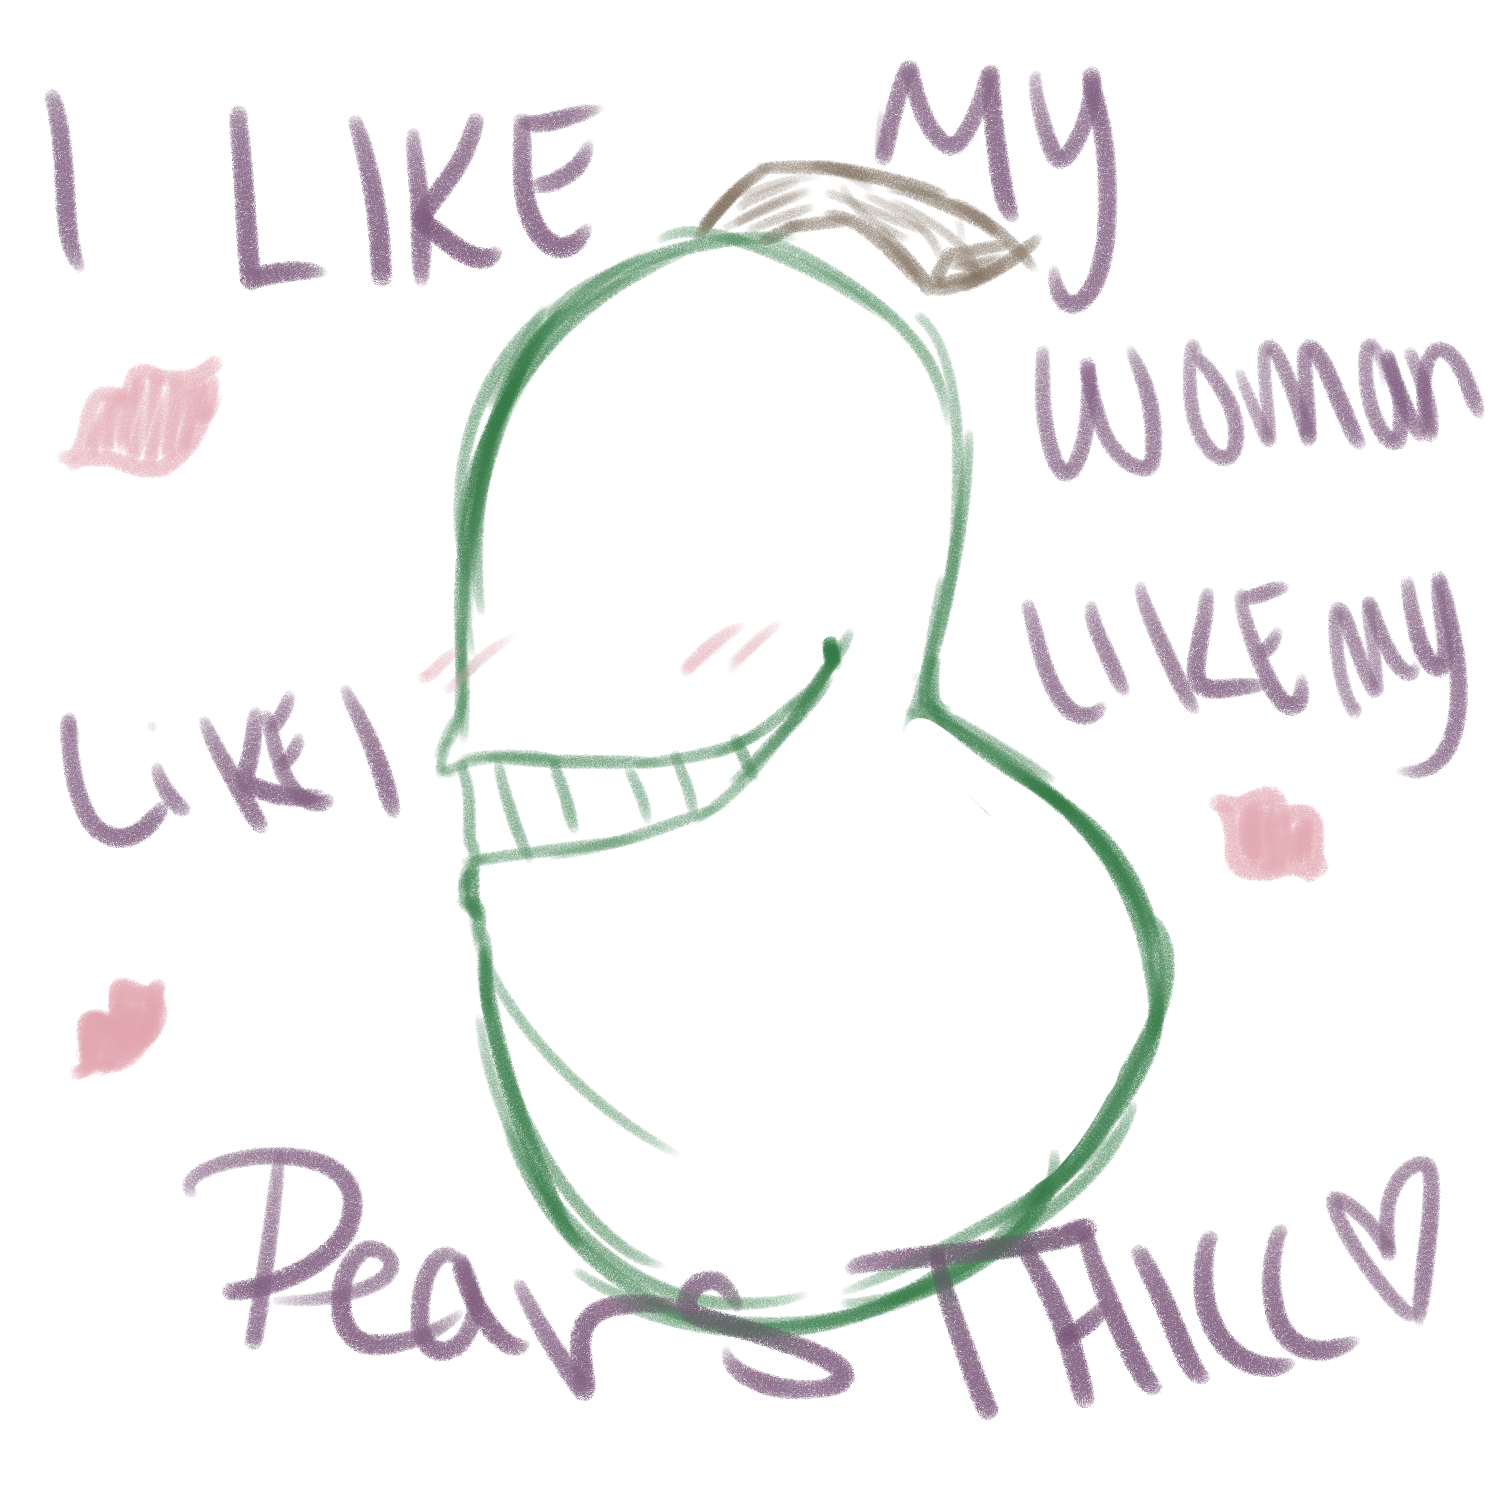 Thicc pear